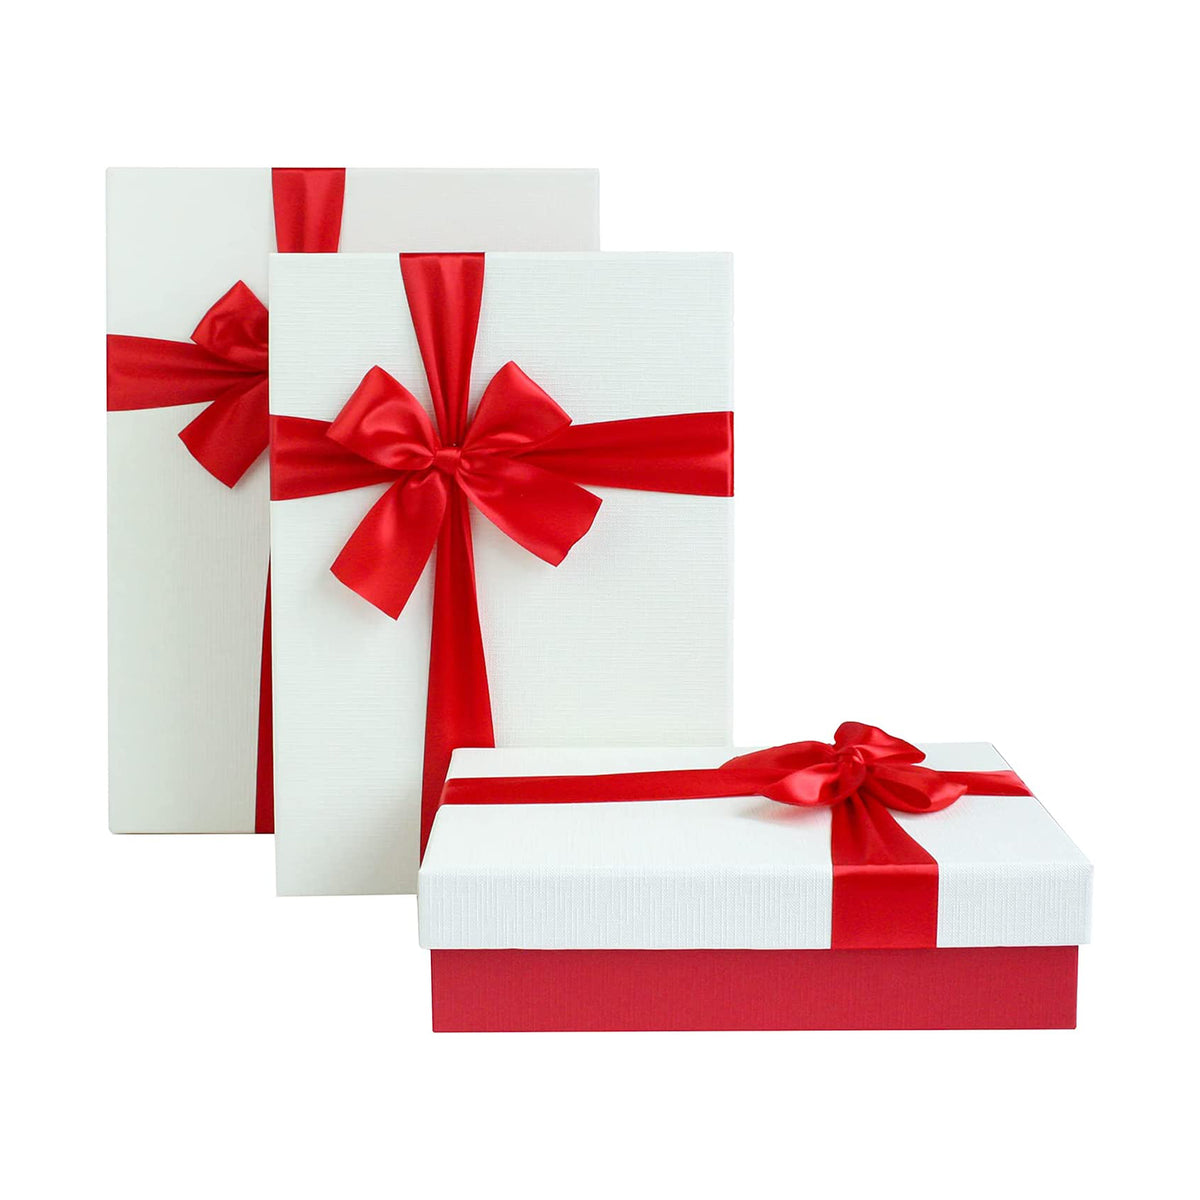 Luxury Red/White Gift Boxes - Set of 3 (Sizes Available)